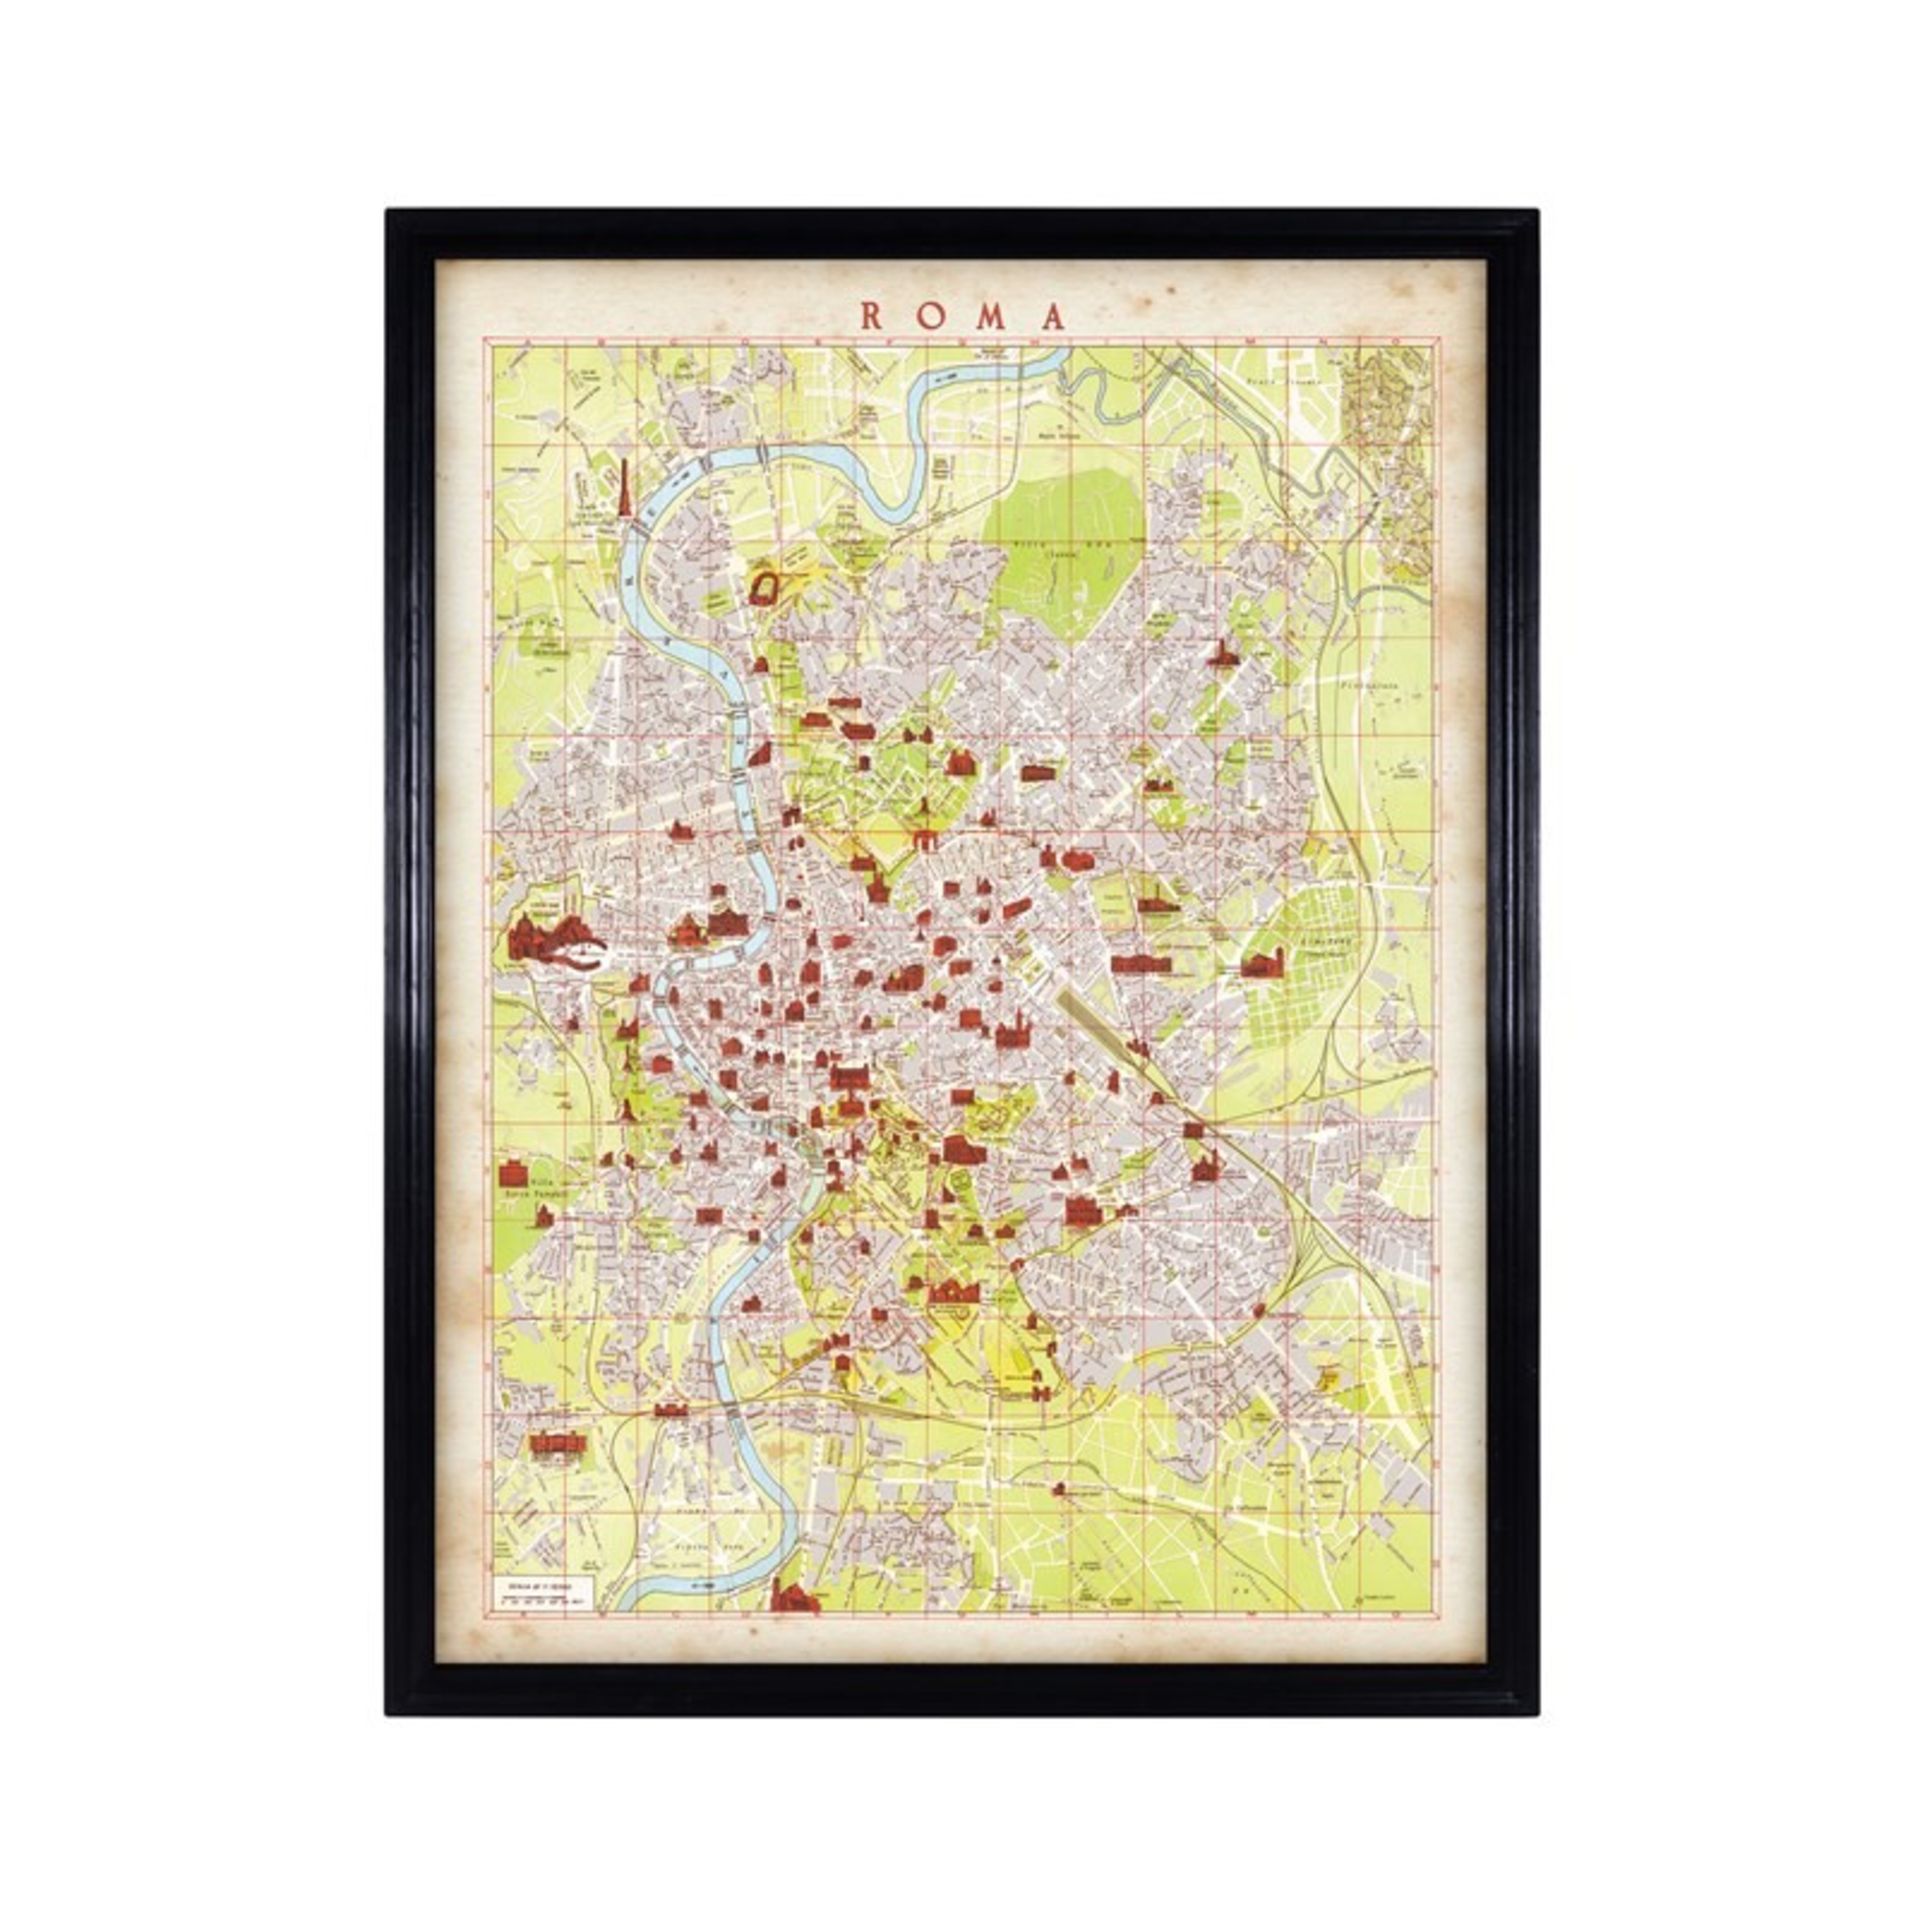 Capital Map Rome These Unframed City Maps Pay Homage To Each City’s History And The Life Stories